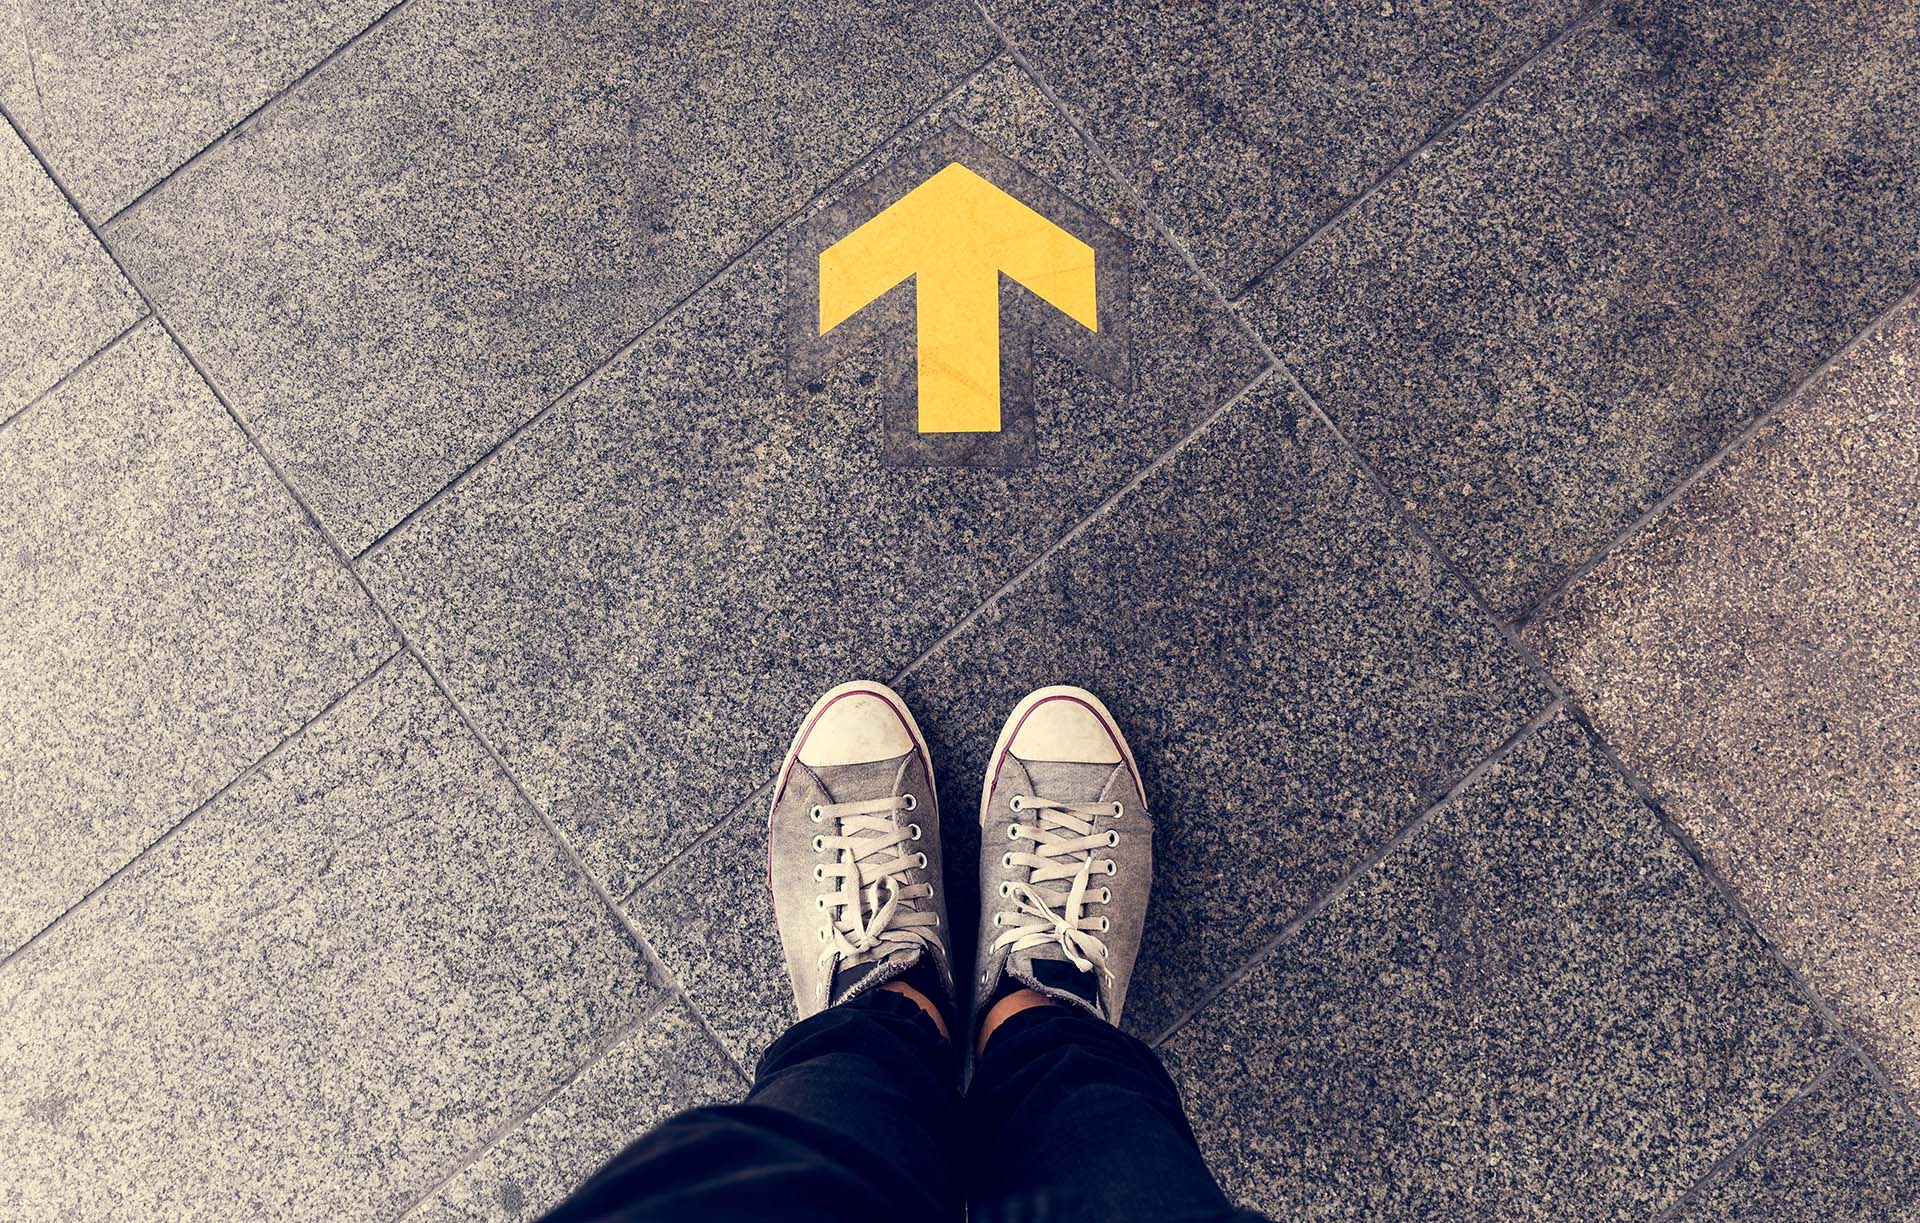 Symbolising Website Breadcrumbsthere is a person wearing white trainers, stading before a yellow direction arrow that is on the ground. 